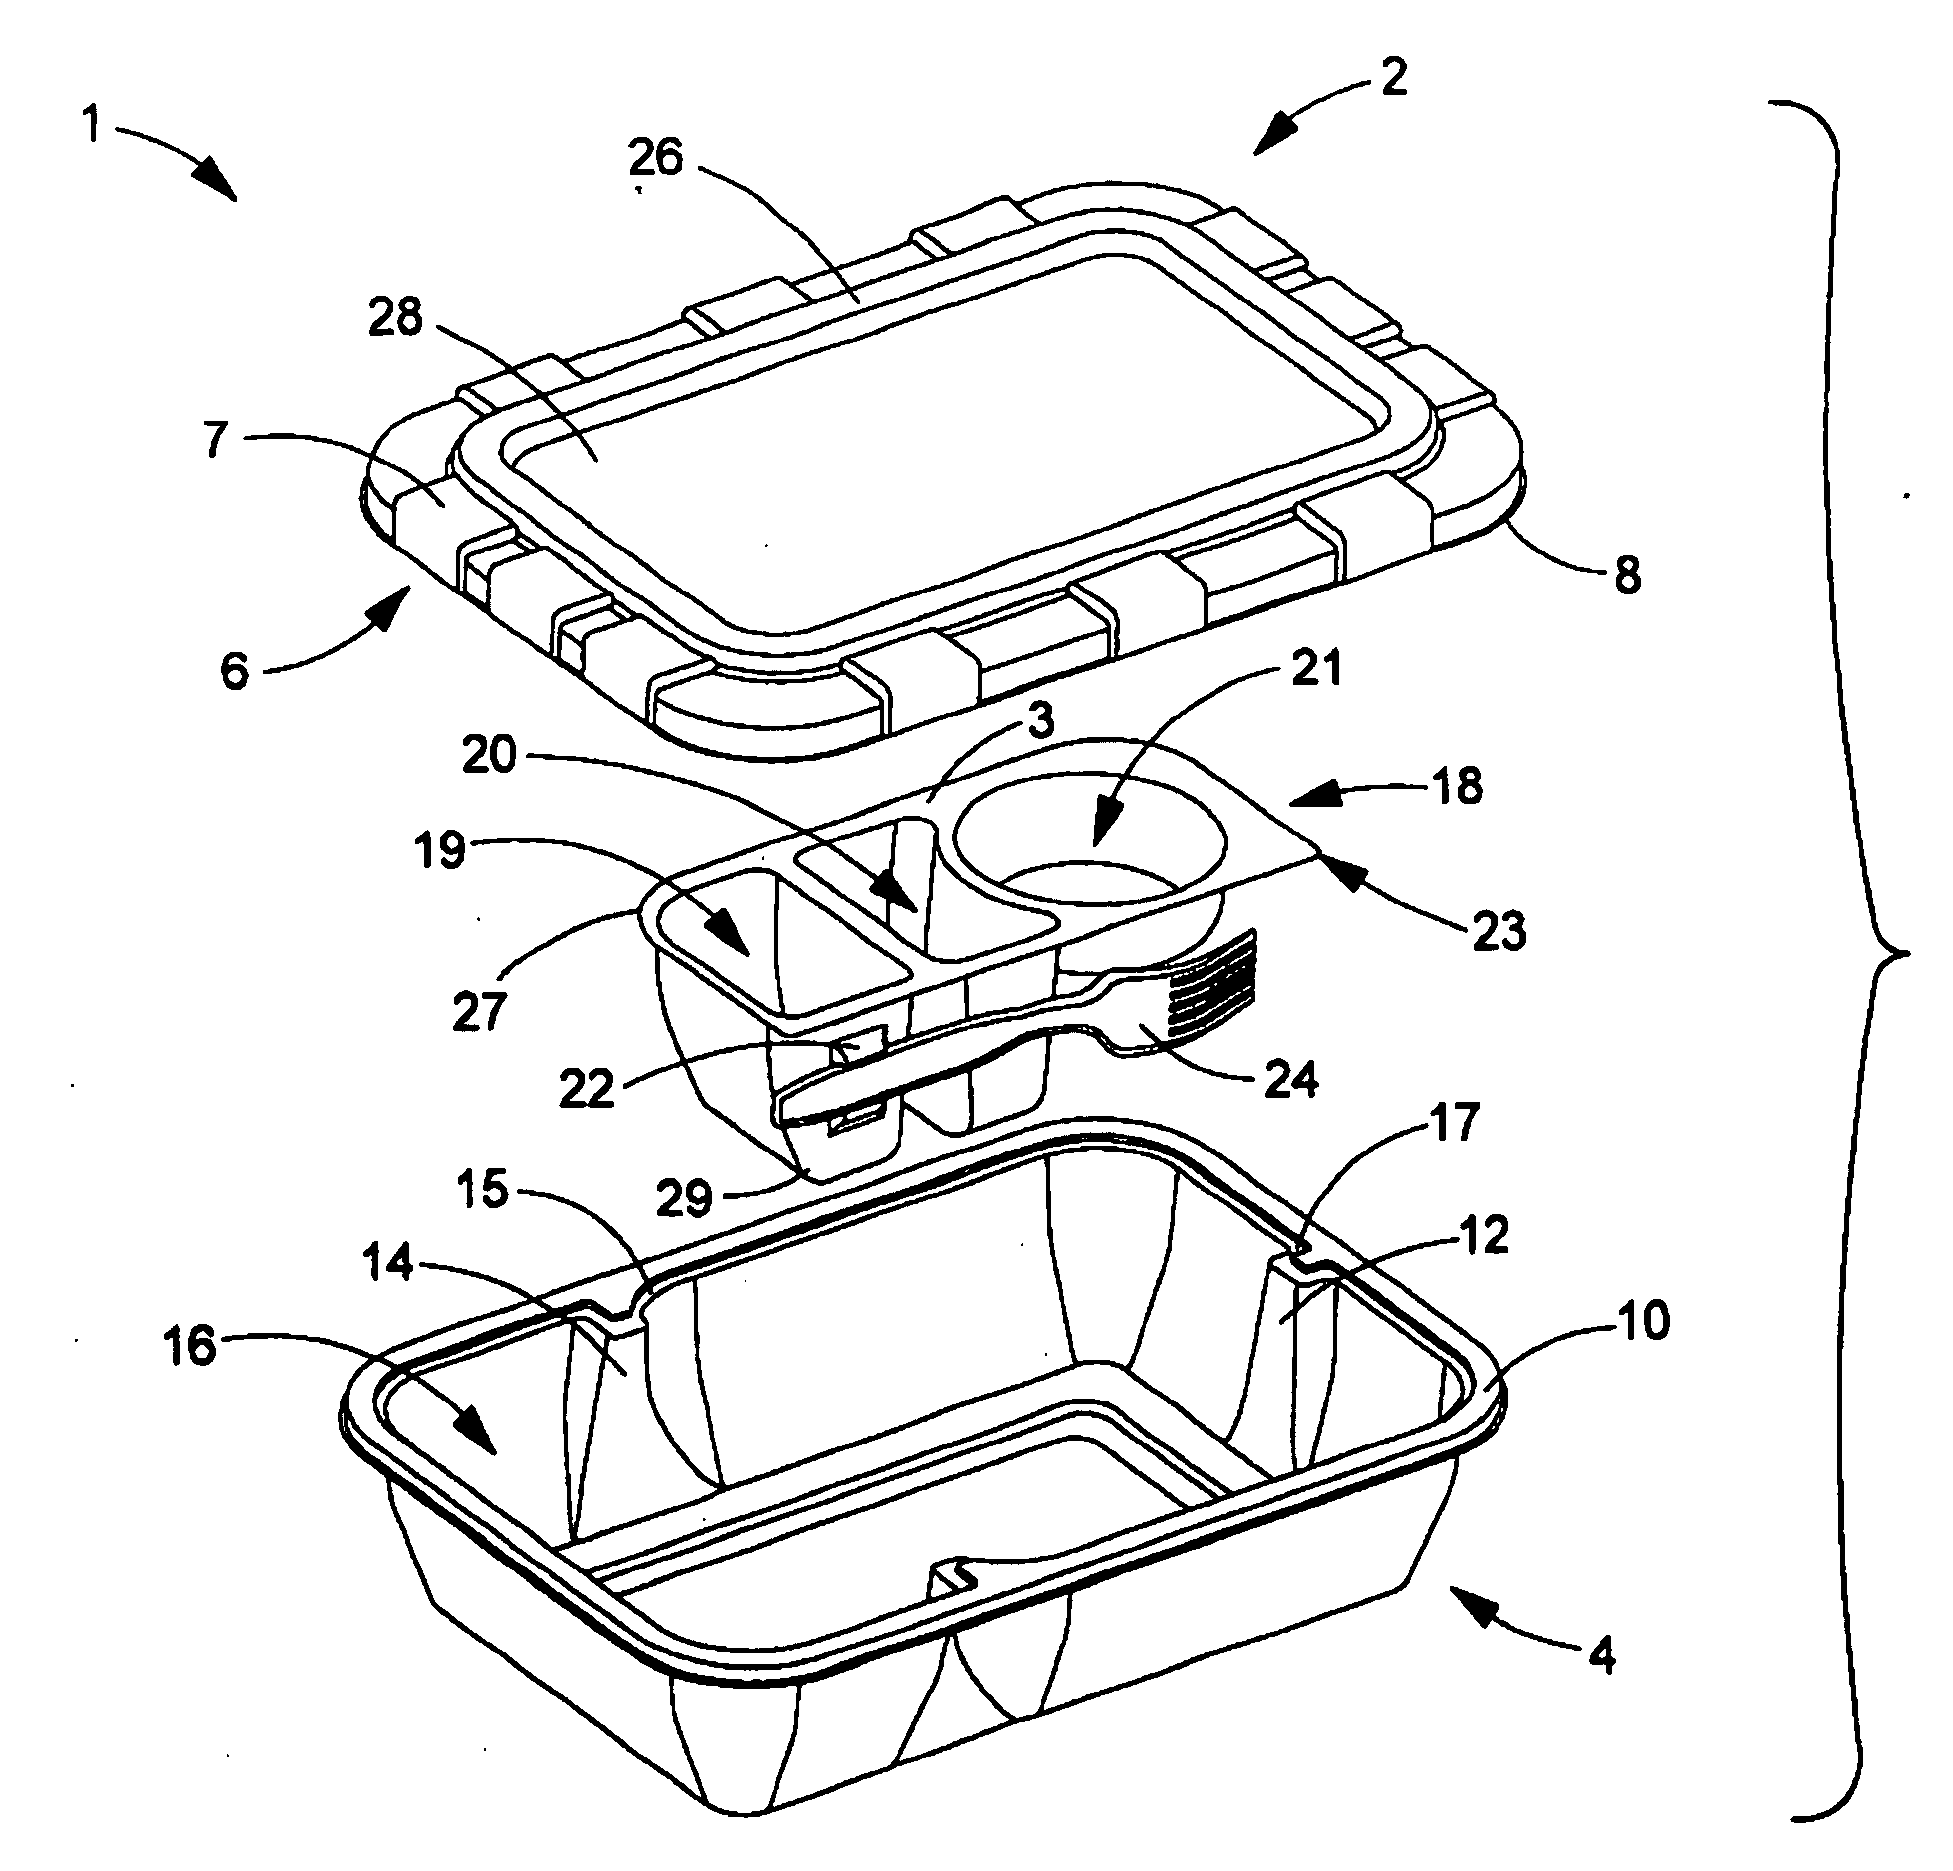 Multi-topping tray container system